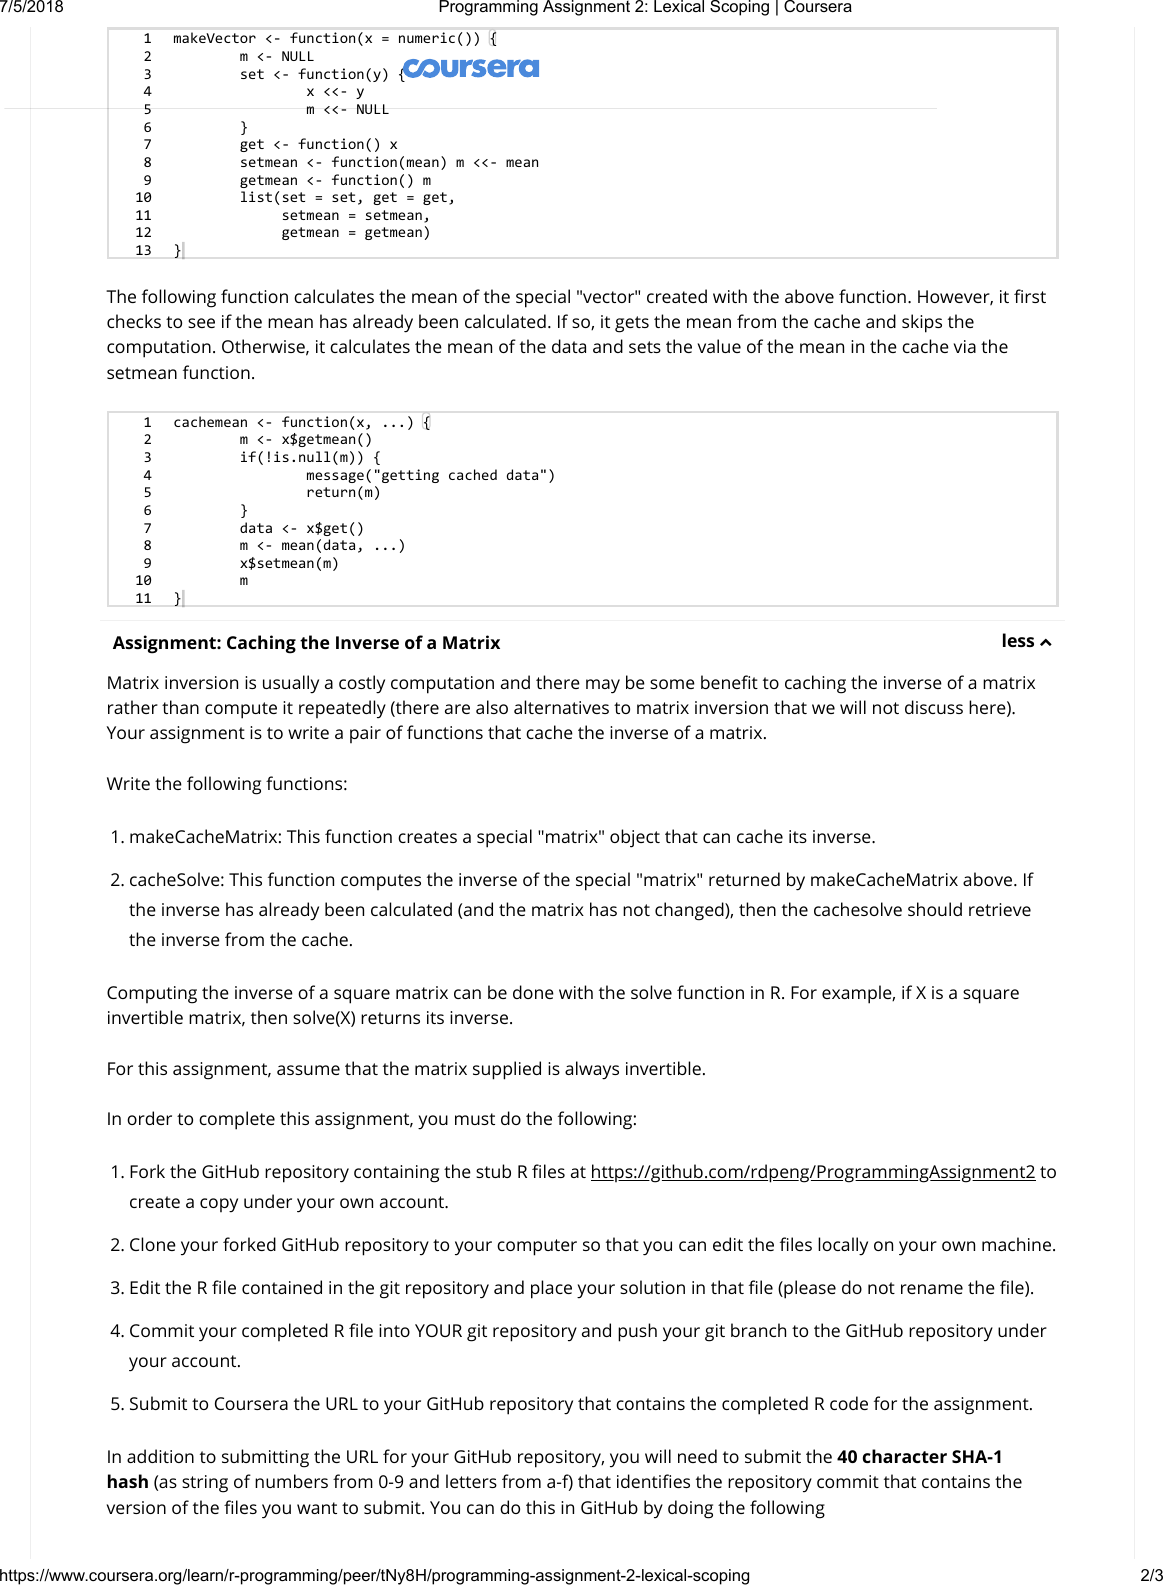 coursera r programming assignment 2 lexical scoping